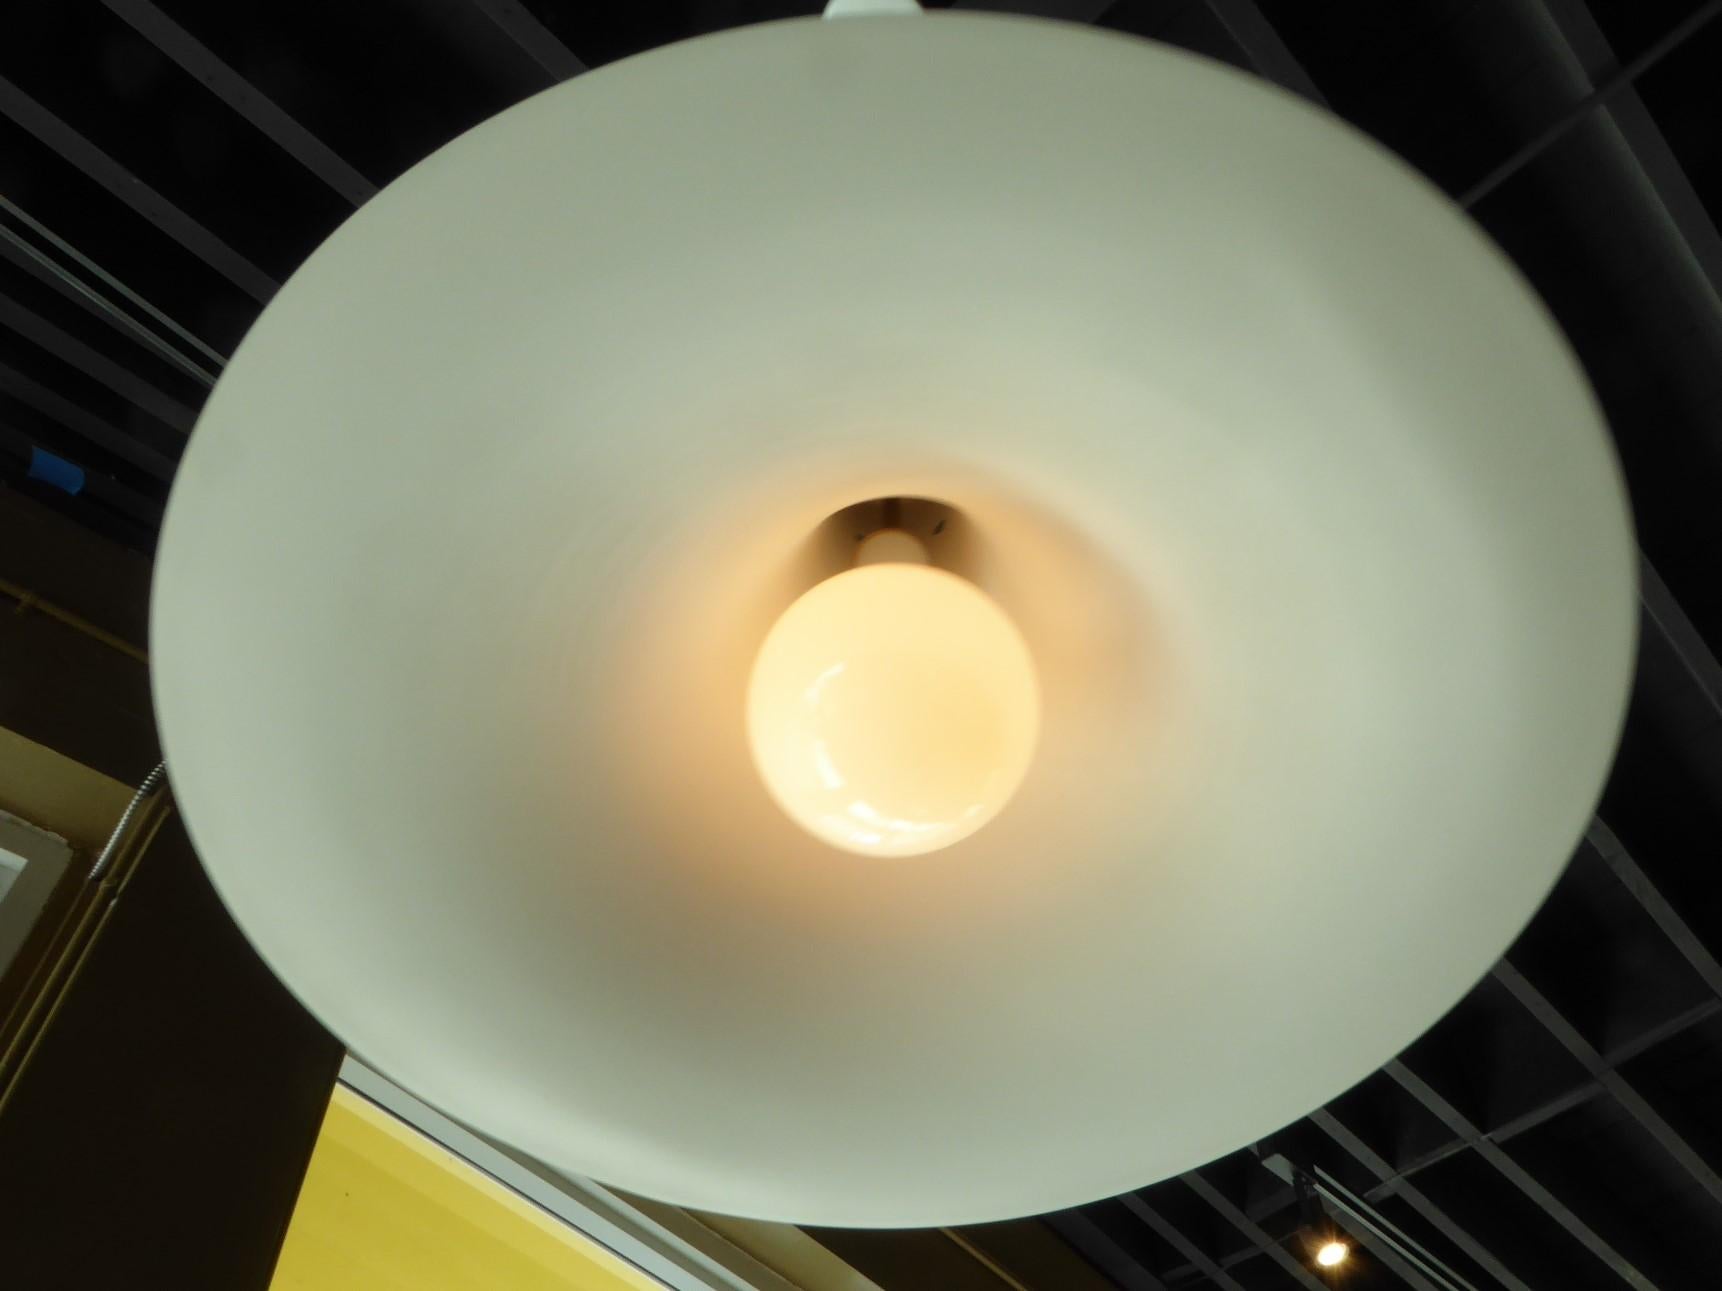 A Space Age Modern large 1970s pendant light by Bent Norsted for Lyskær Belysning  with a downward trumpet shape design in brushed aluminum with a white inside.  Takes a single bulb, medium base, often called Edison base (100 max. wattage).  We